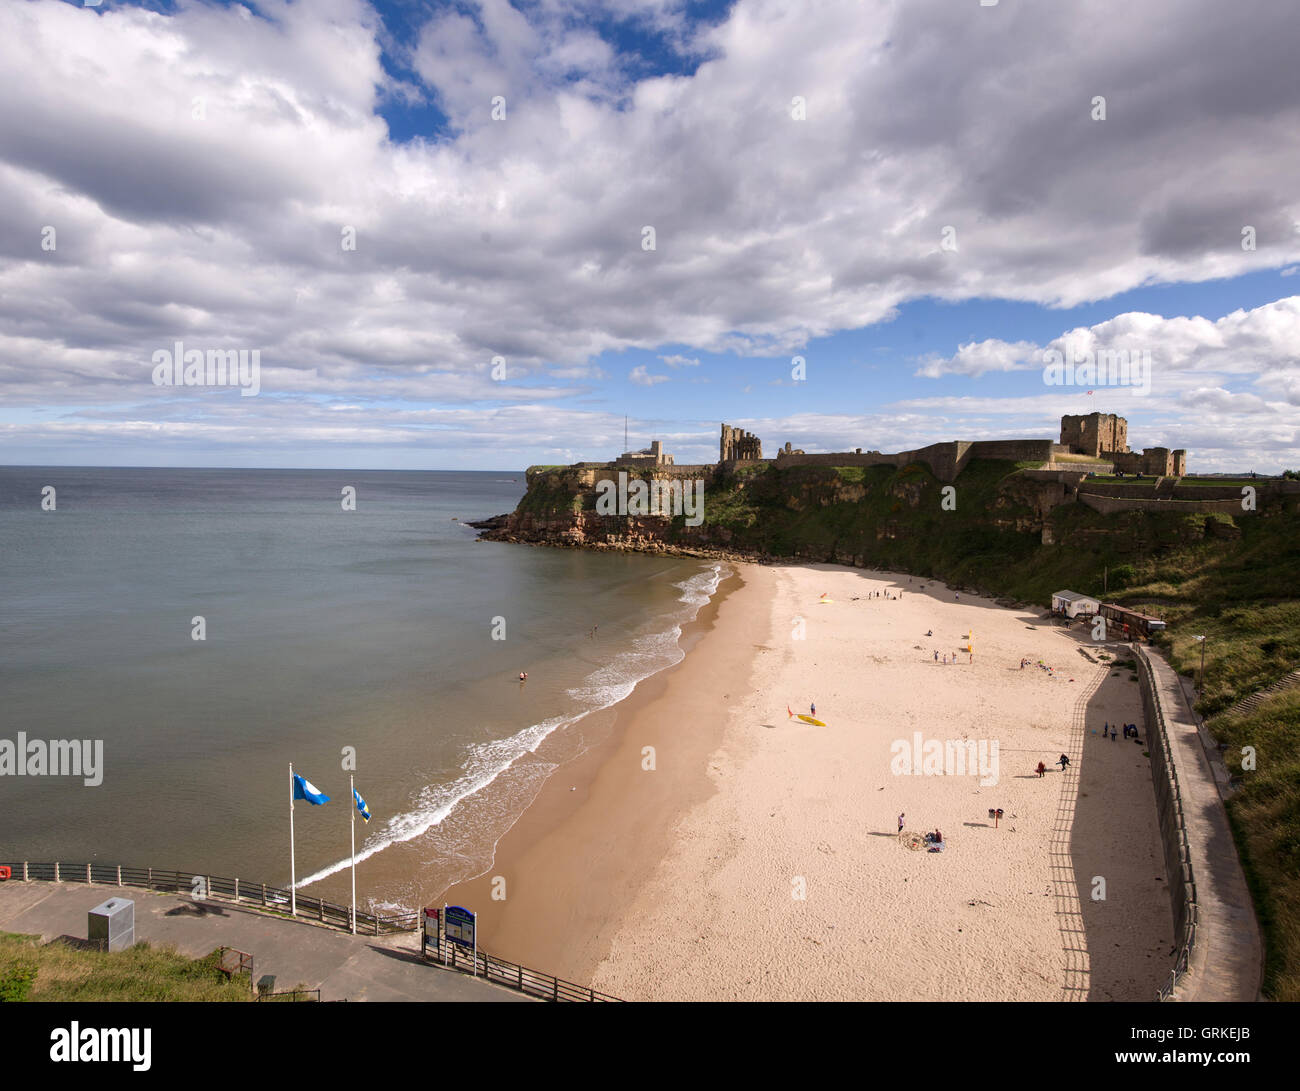 King Edwards Bay and Tynemouth Priory, Tynemouth, North East England Stock Photo